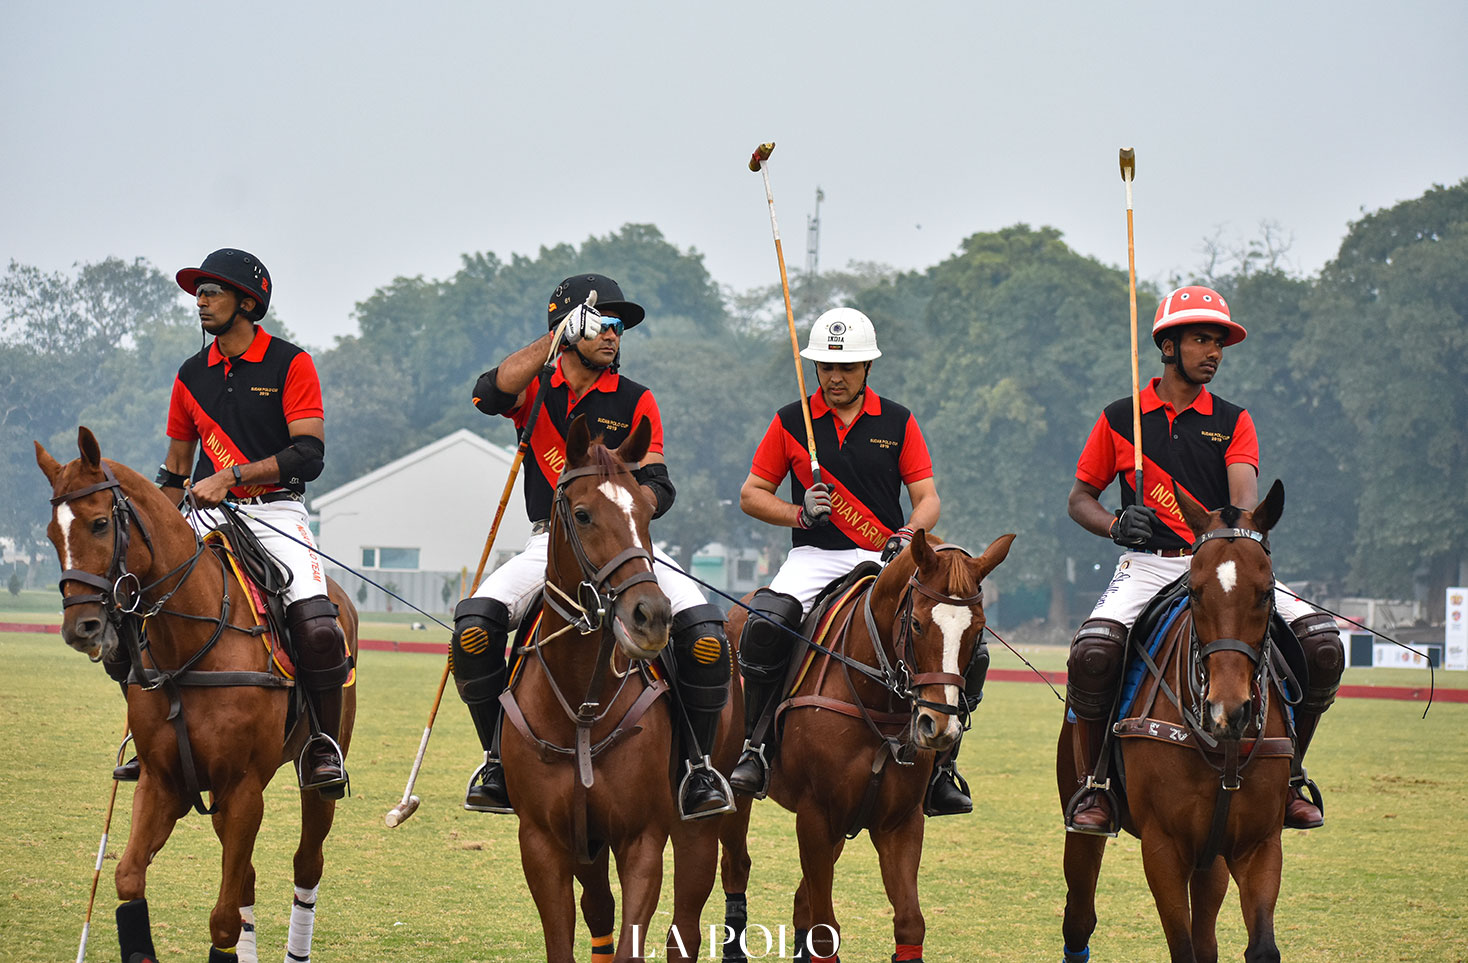 Indian-army-team-61-cavalry-indian-polo-lapolo